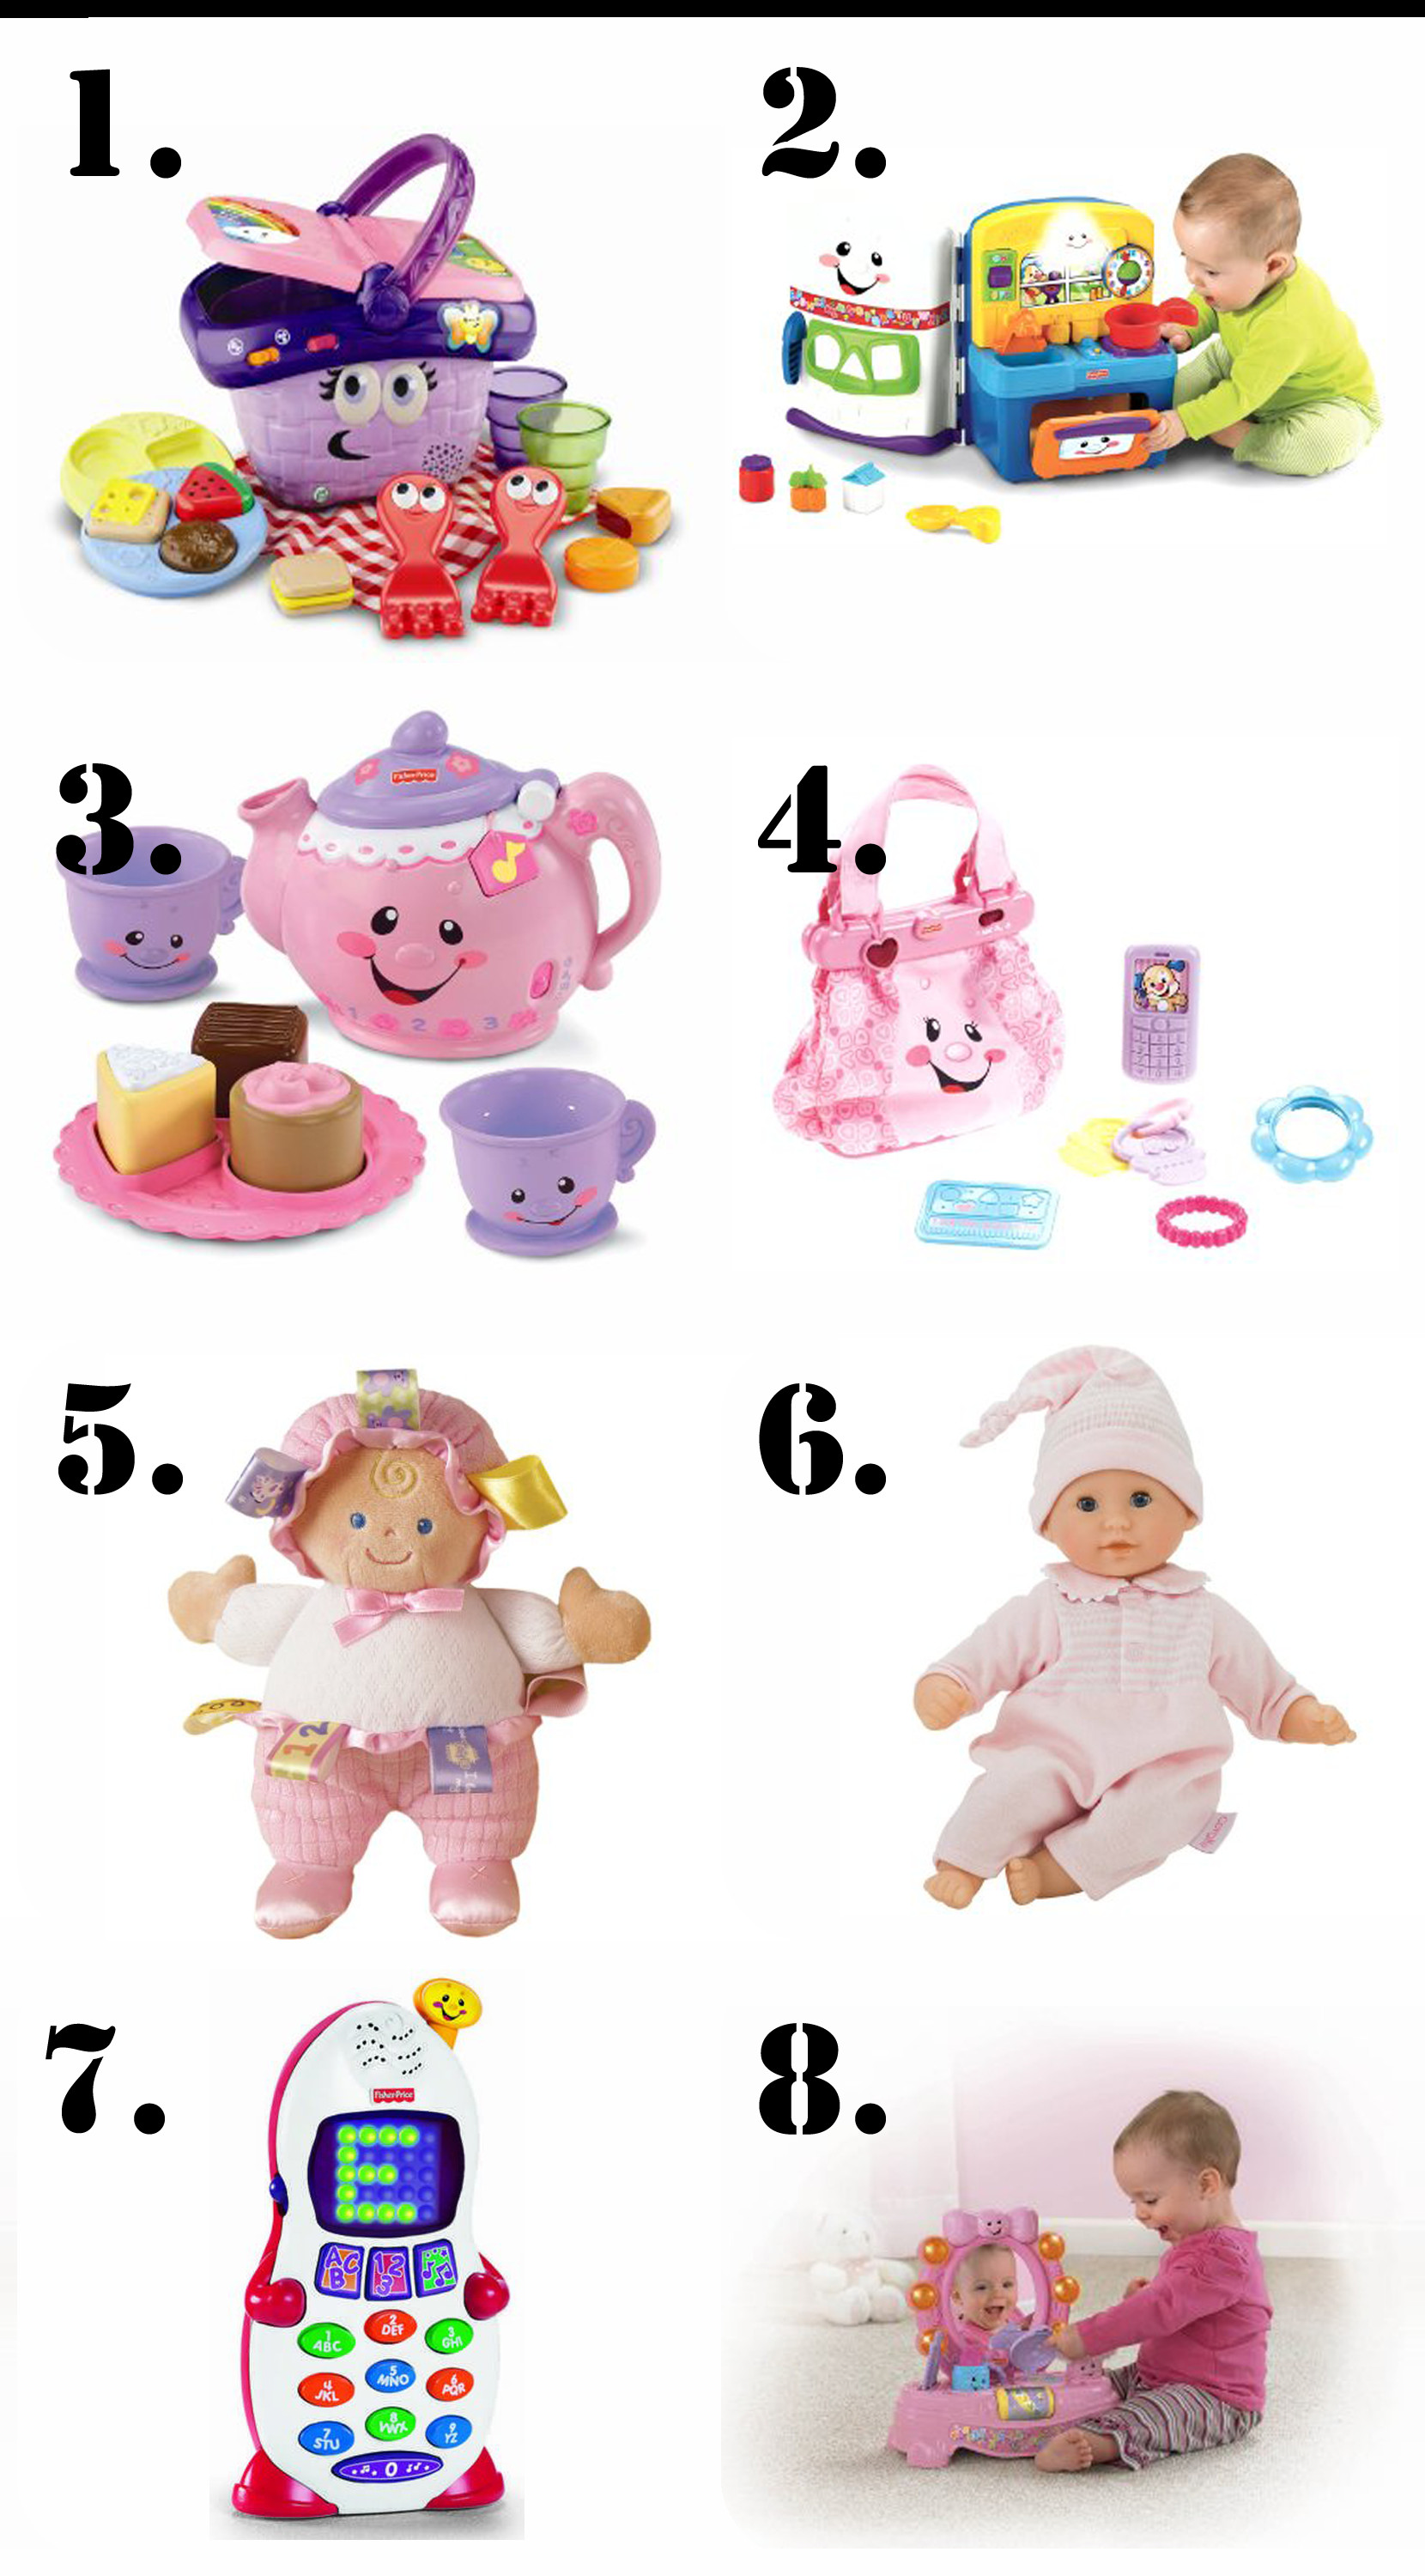 Birthday Gifts For 1 Year Old Baby Girl
 The Ultimate List of Gift Ideas for a 1 Year Old Girl